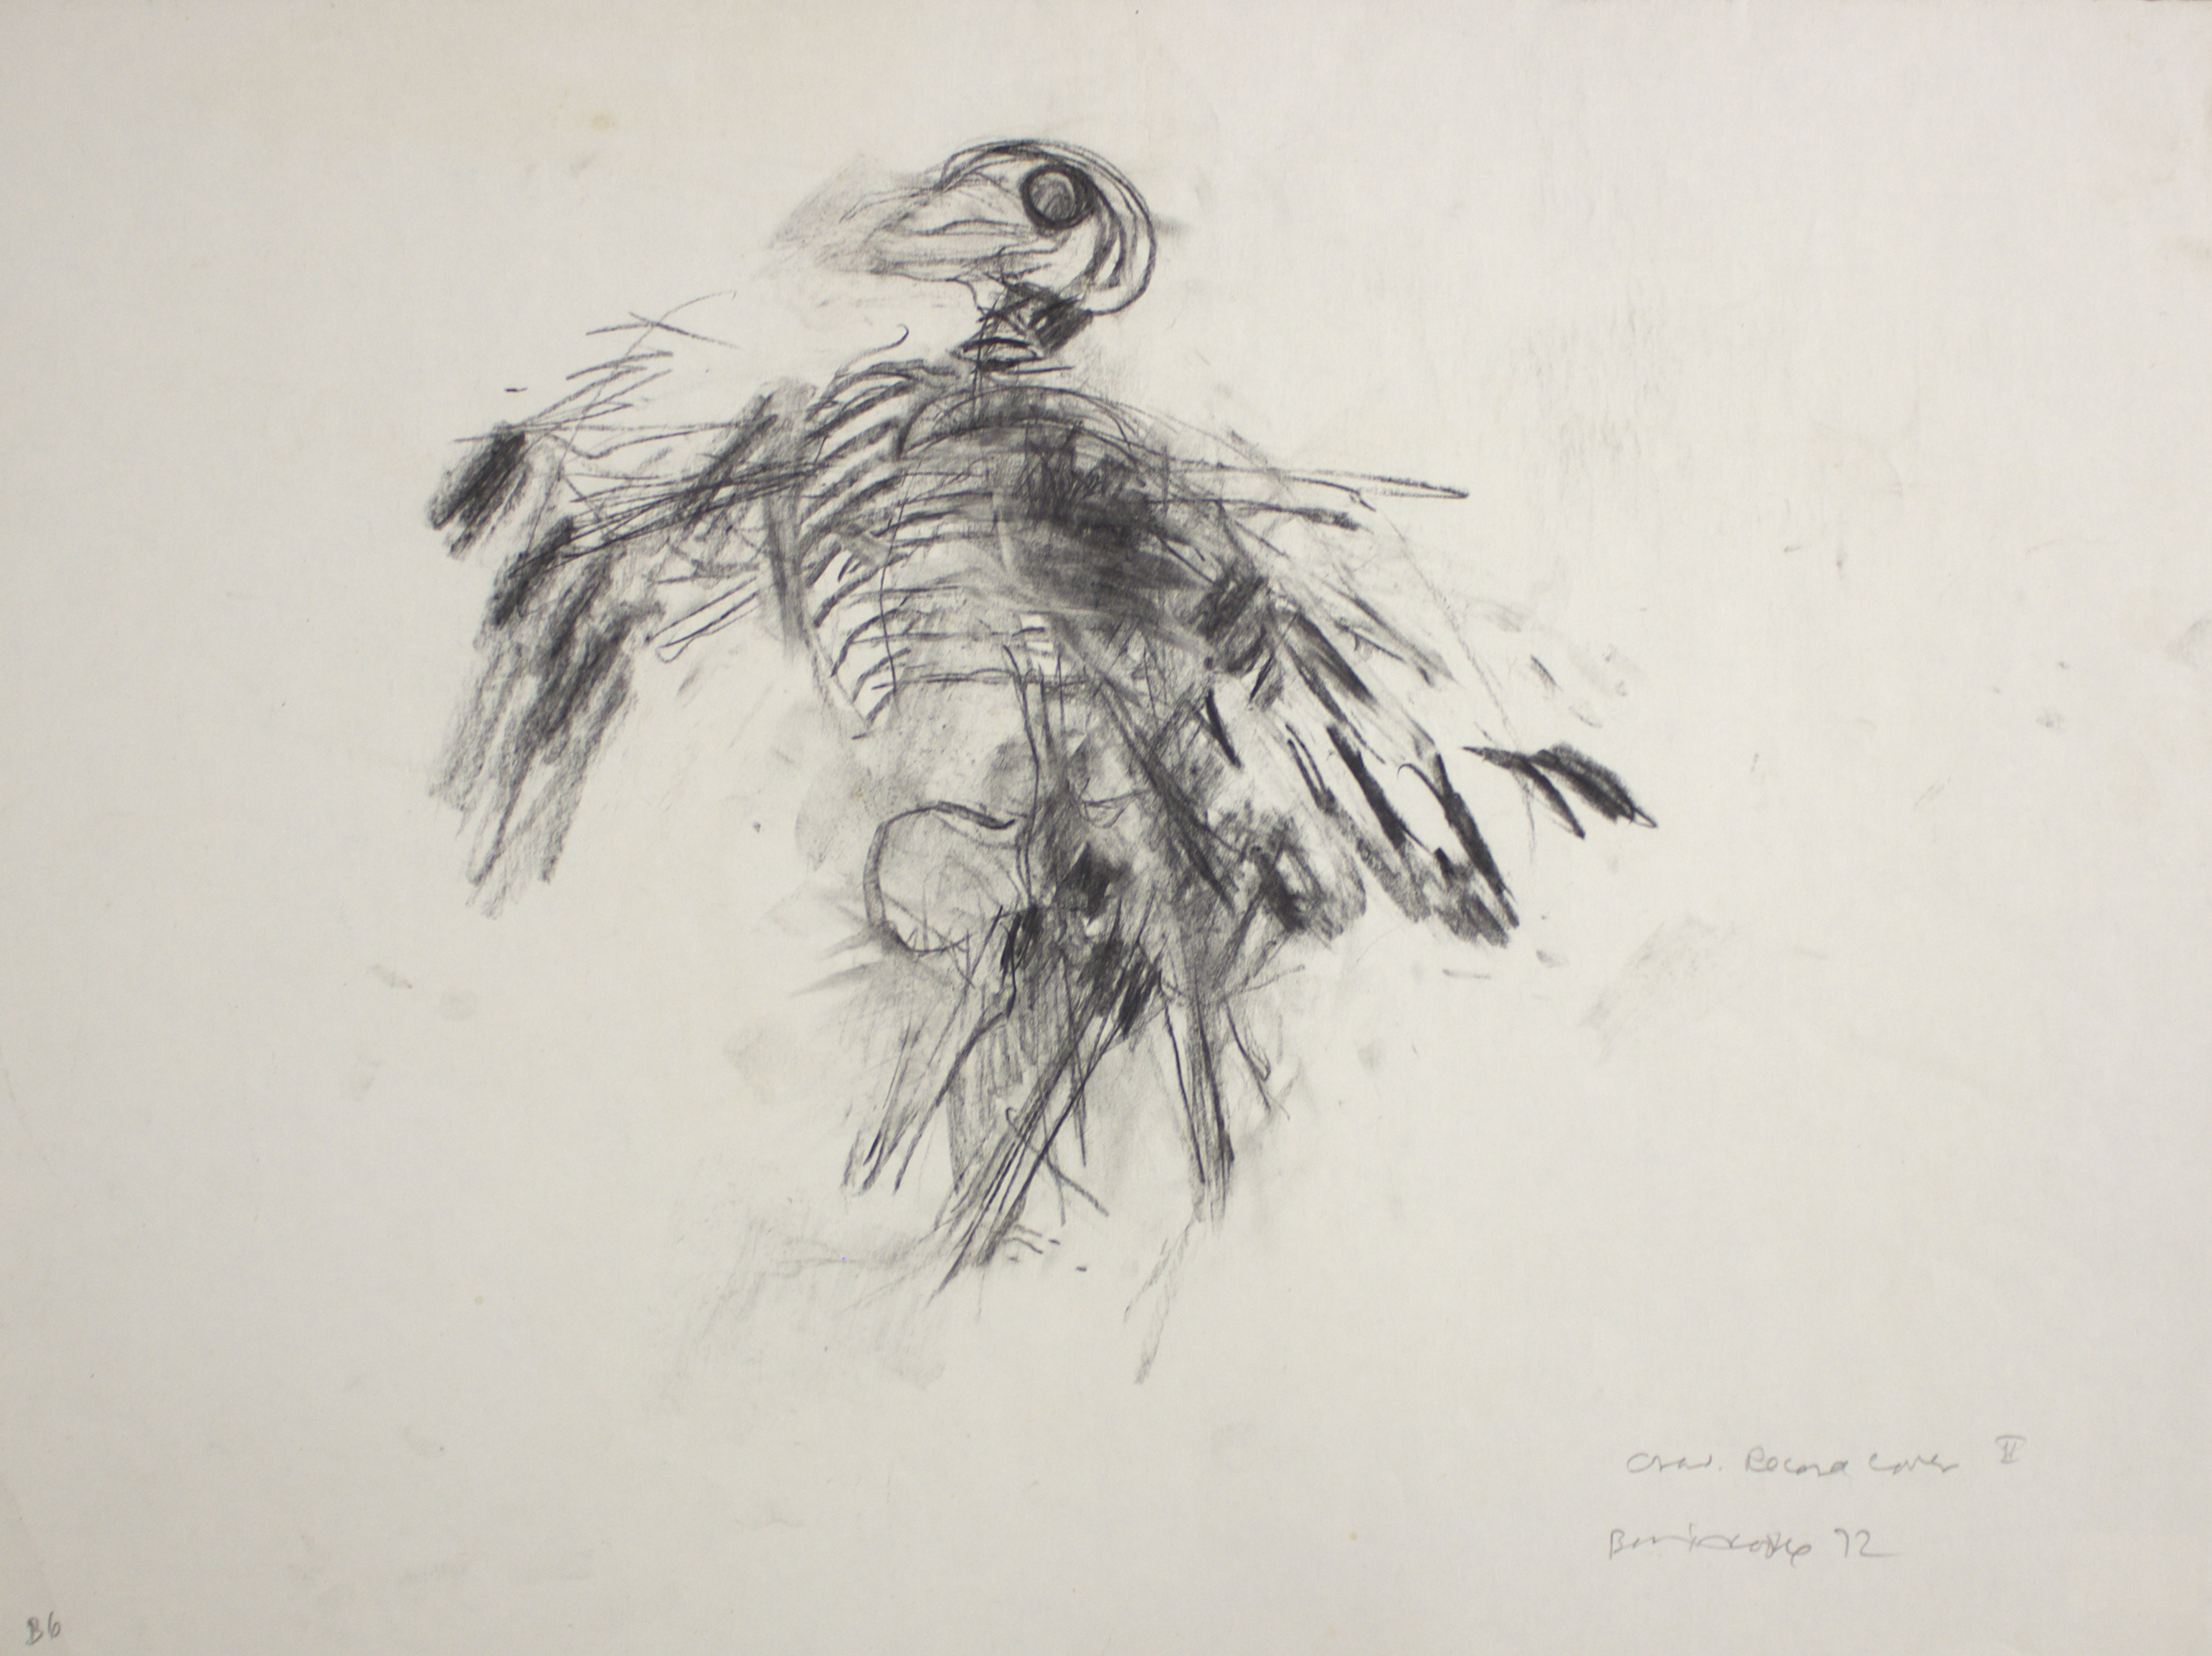 Barrie Cooke, ‘Crow II’ (Charcoal drawing, 1972) for the cover sleeve of Ted Hughes’ recording of Crow for Claddagh Records. Credit: The Estate of Barrie Cooke. Photograph by the Cambridge Colleges Conservation Consortium.